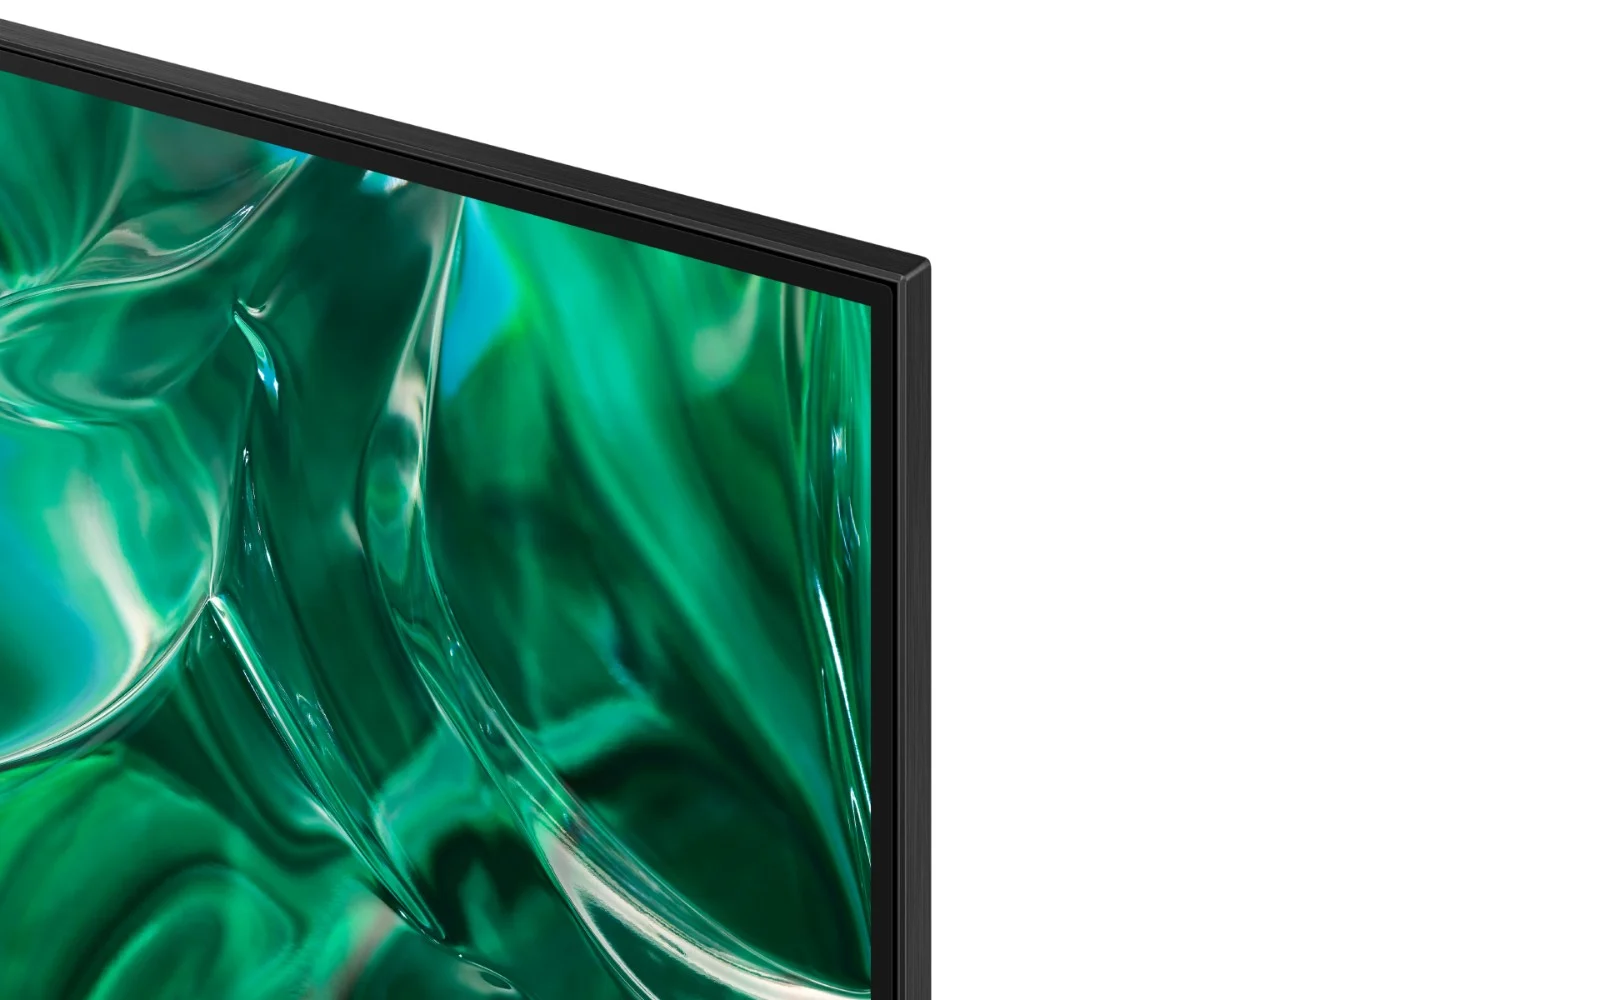 Samsung is betting on MicroLED and 8K for its premium TVs in 2023